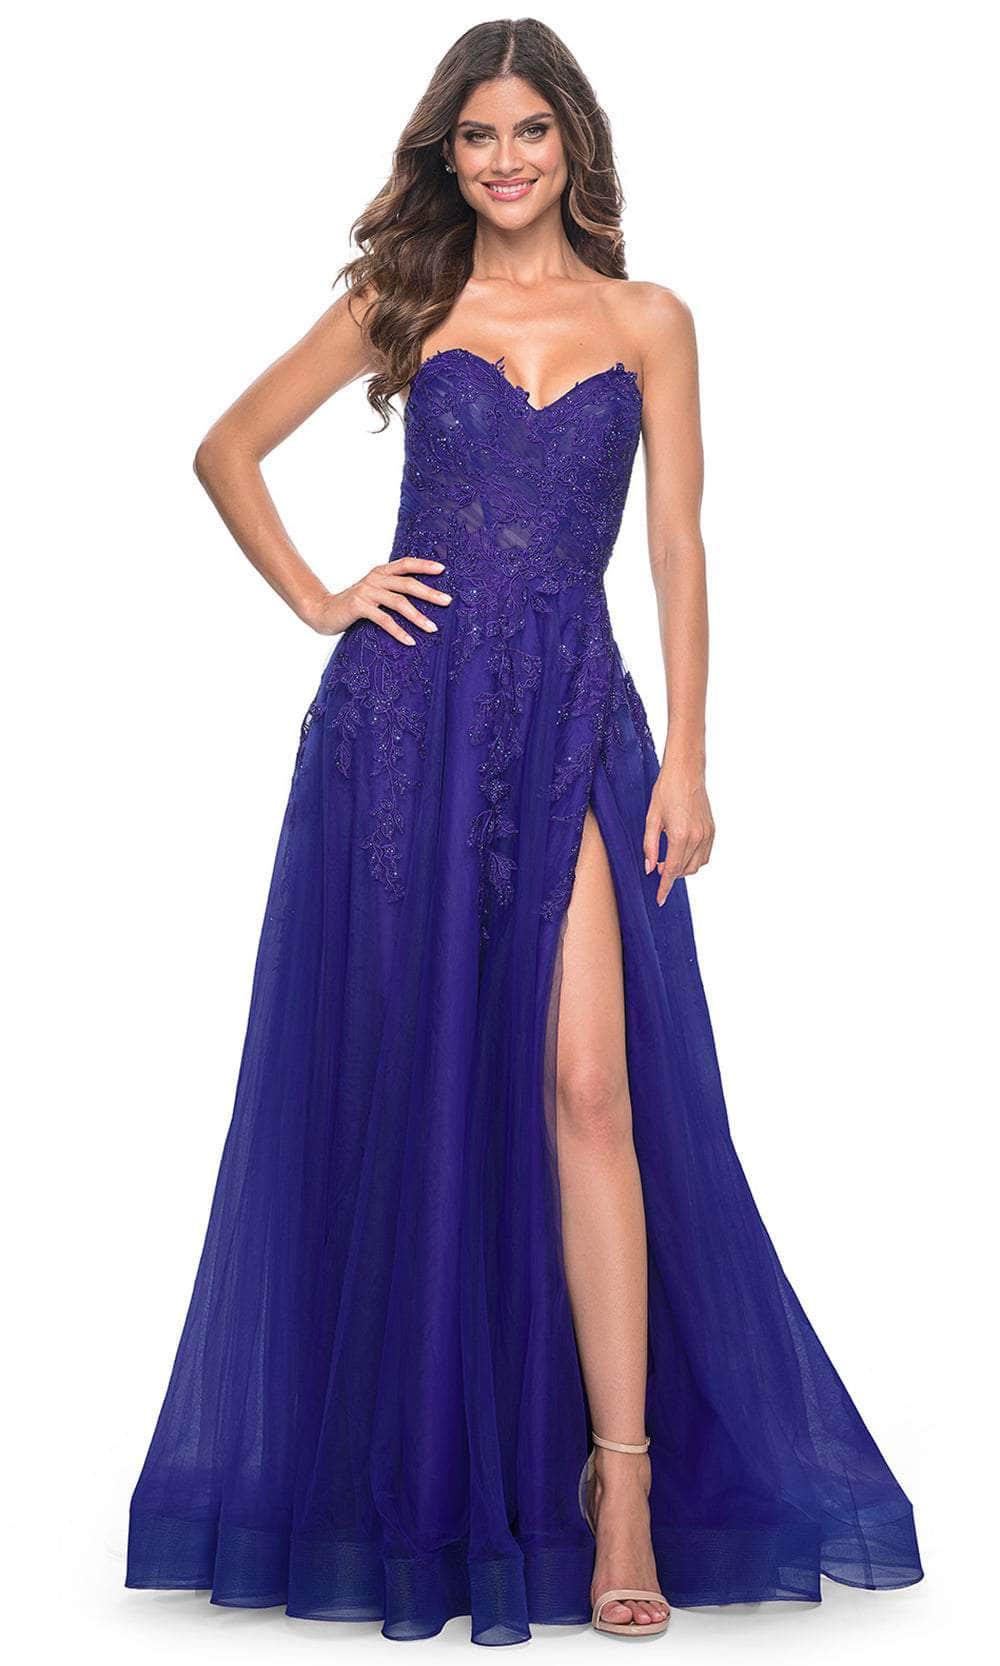 La Femme 32304 - Sweetheart Tulle A-Line Prom Gown
